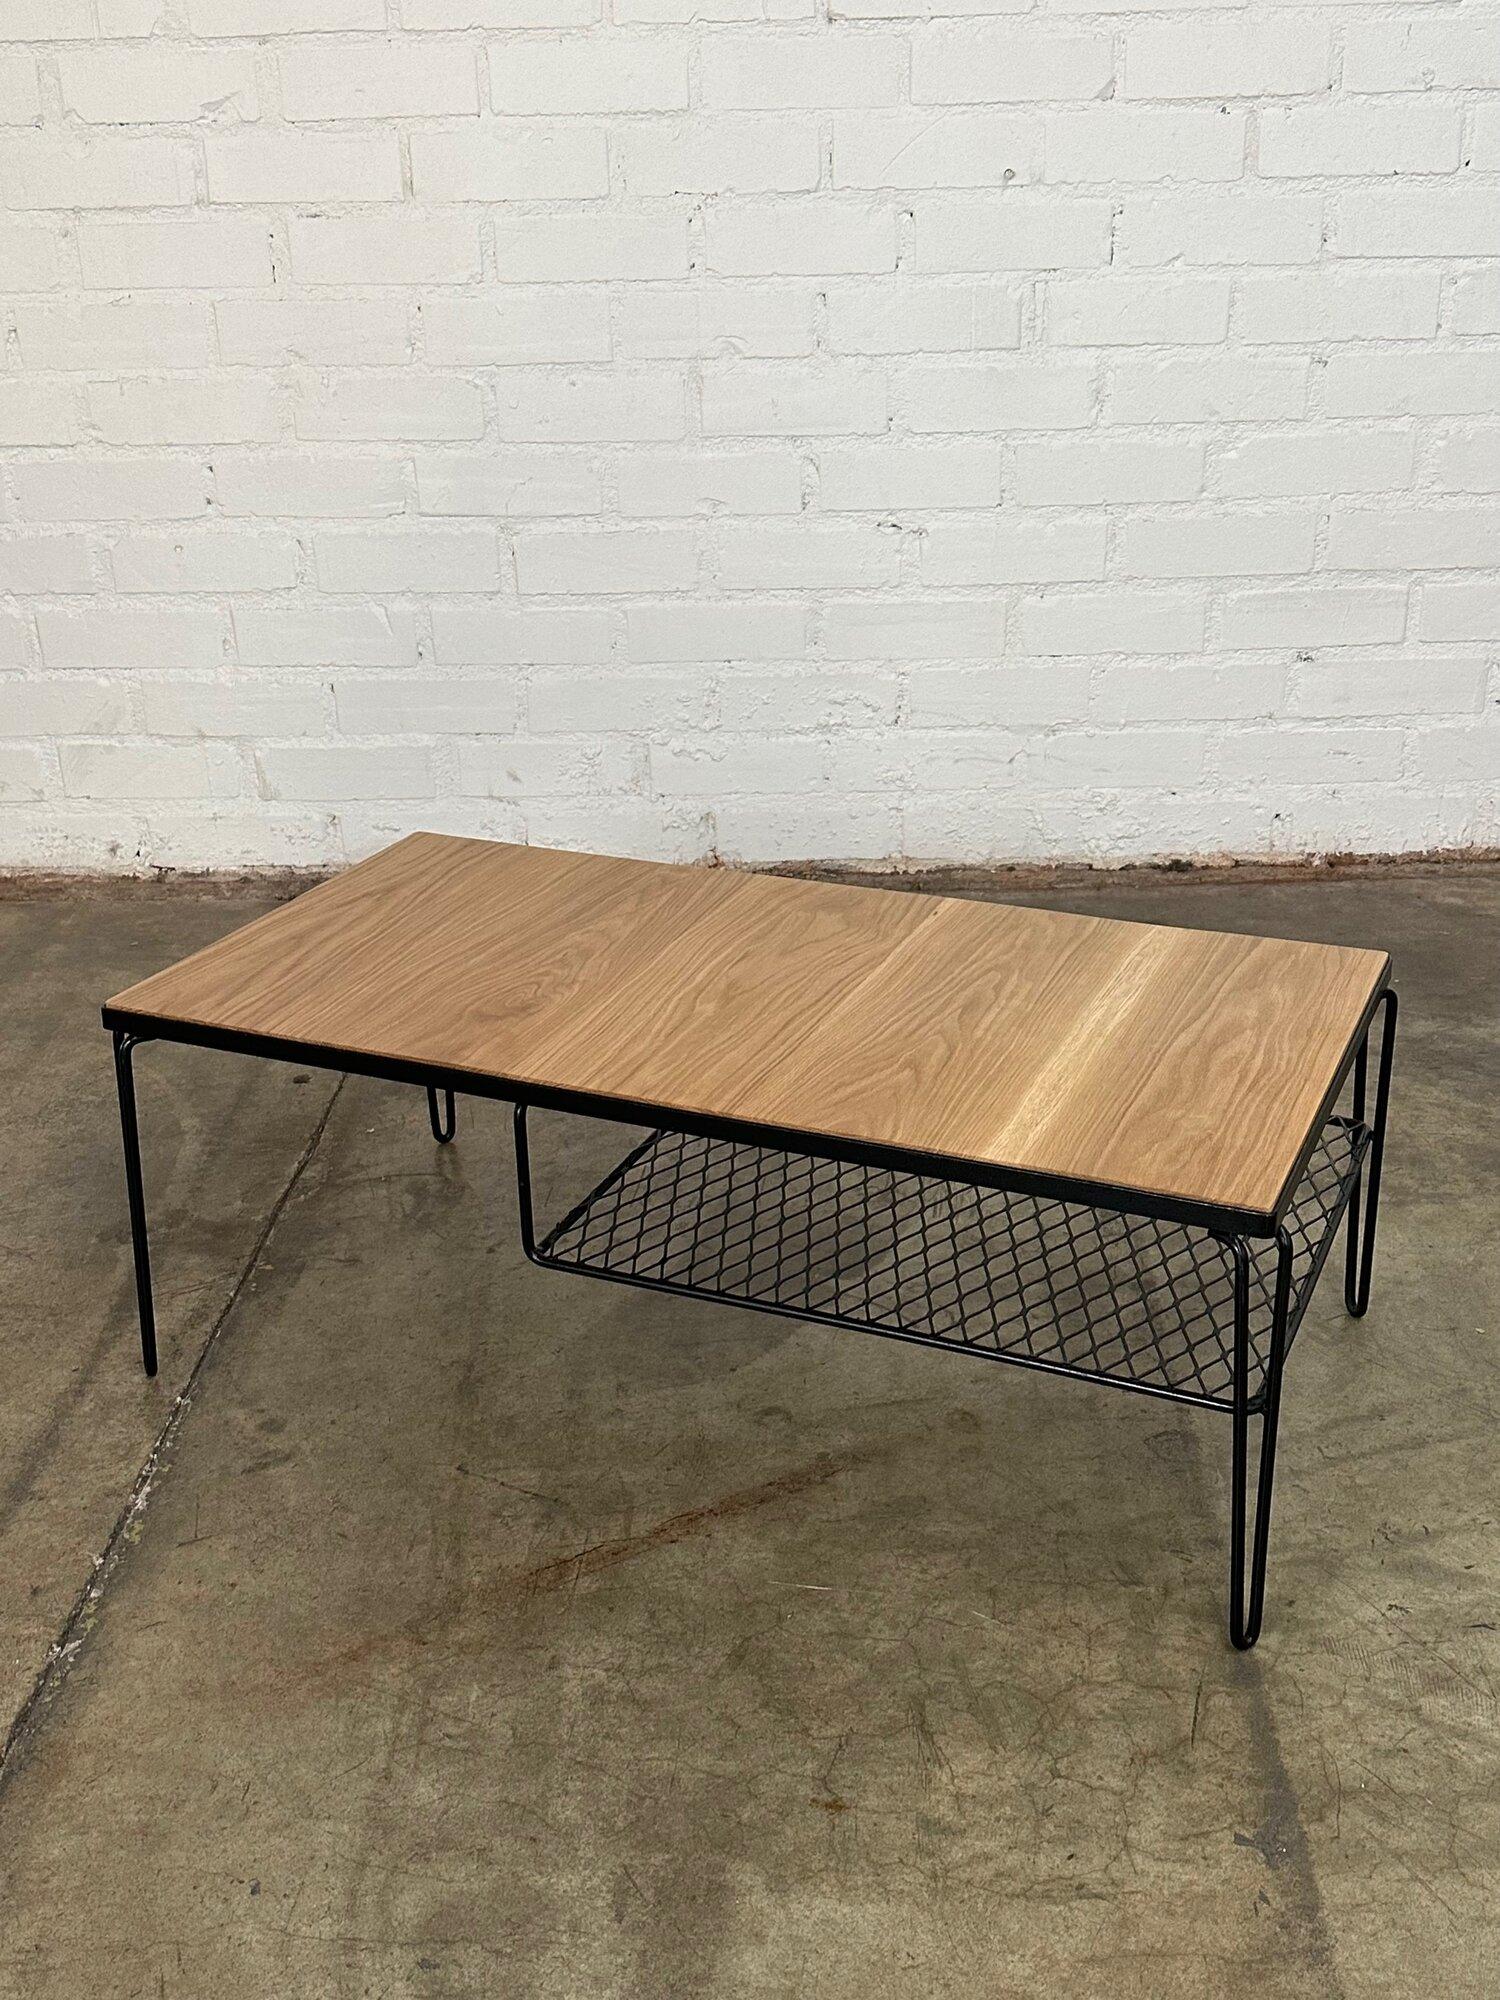 W40 D20 H15

Fully restored oak and iron coffee table. Item is structurally sound and sturdy with no major areas of wear. Surface wood has a clear coat showing natural grain hues. 